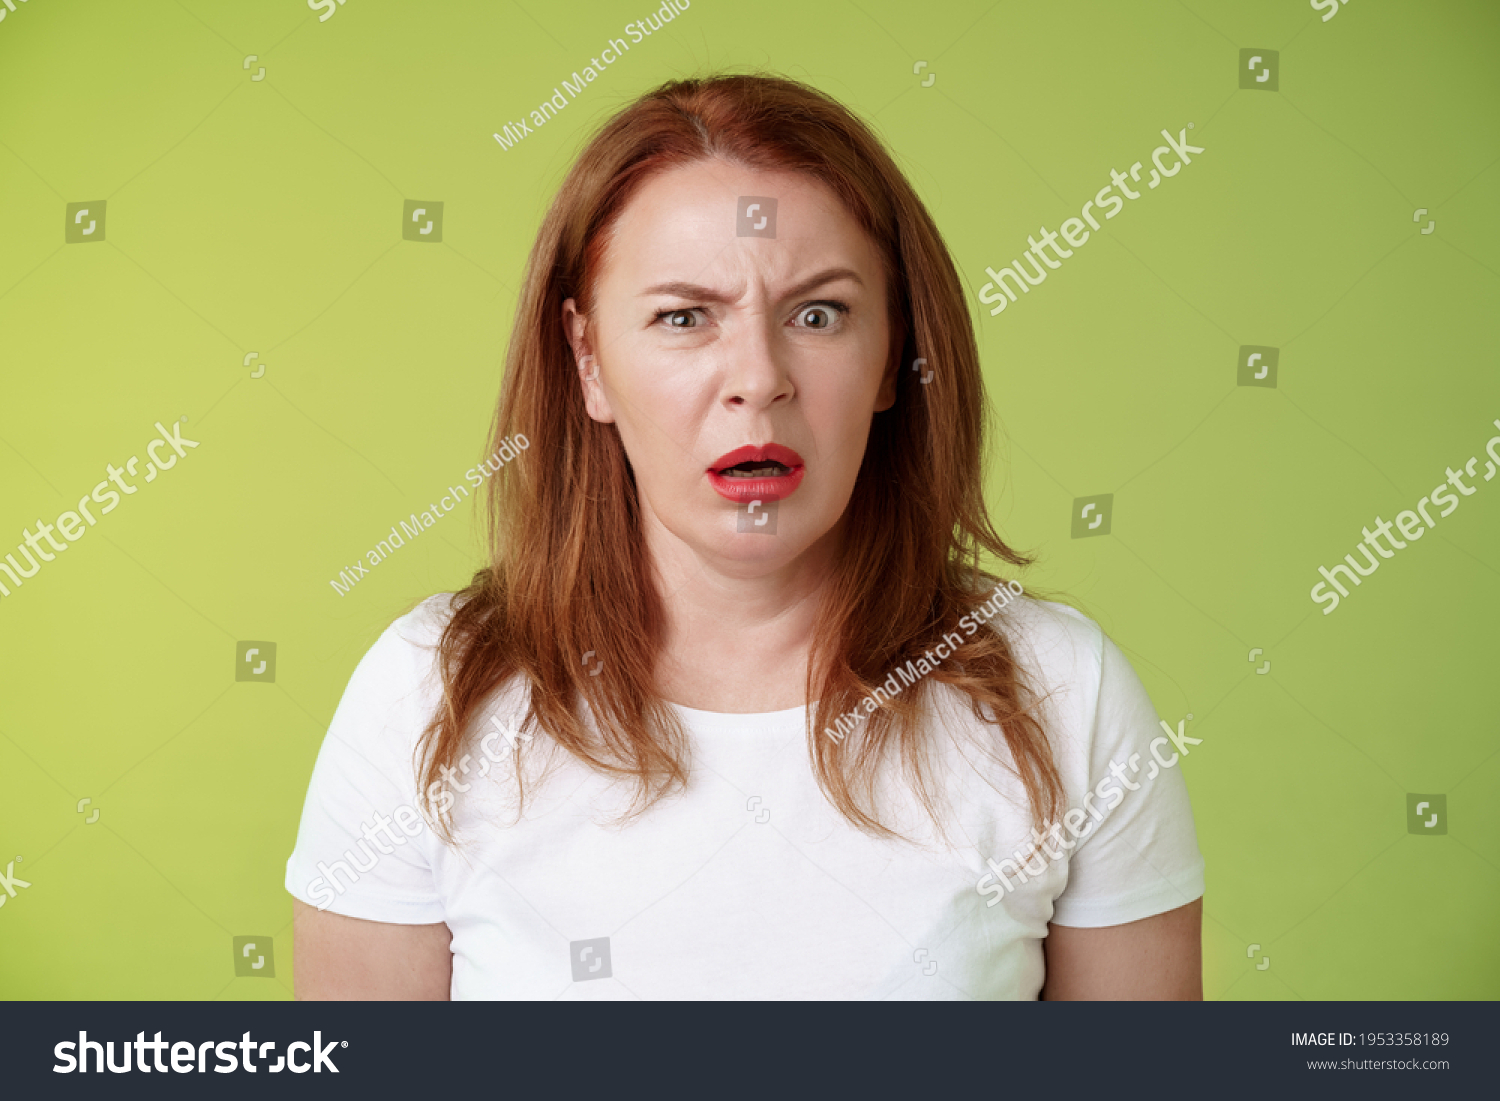 Confused shocked gasping middle-aged redhead woman cringe frustrated puzzled open mouth speechless freak out strange shocking scene stand green background perplexed disappointed #1953358189